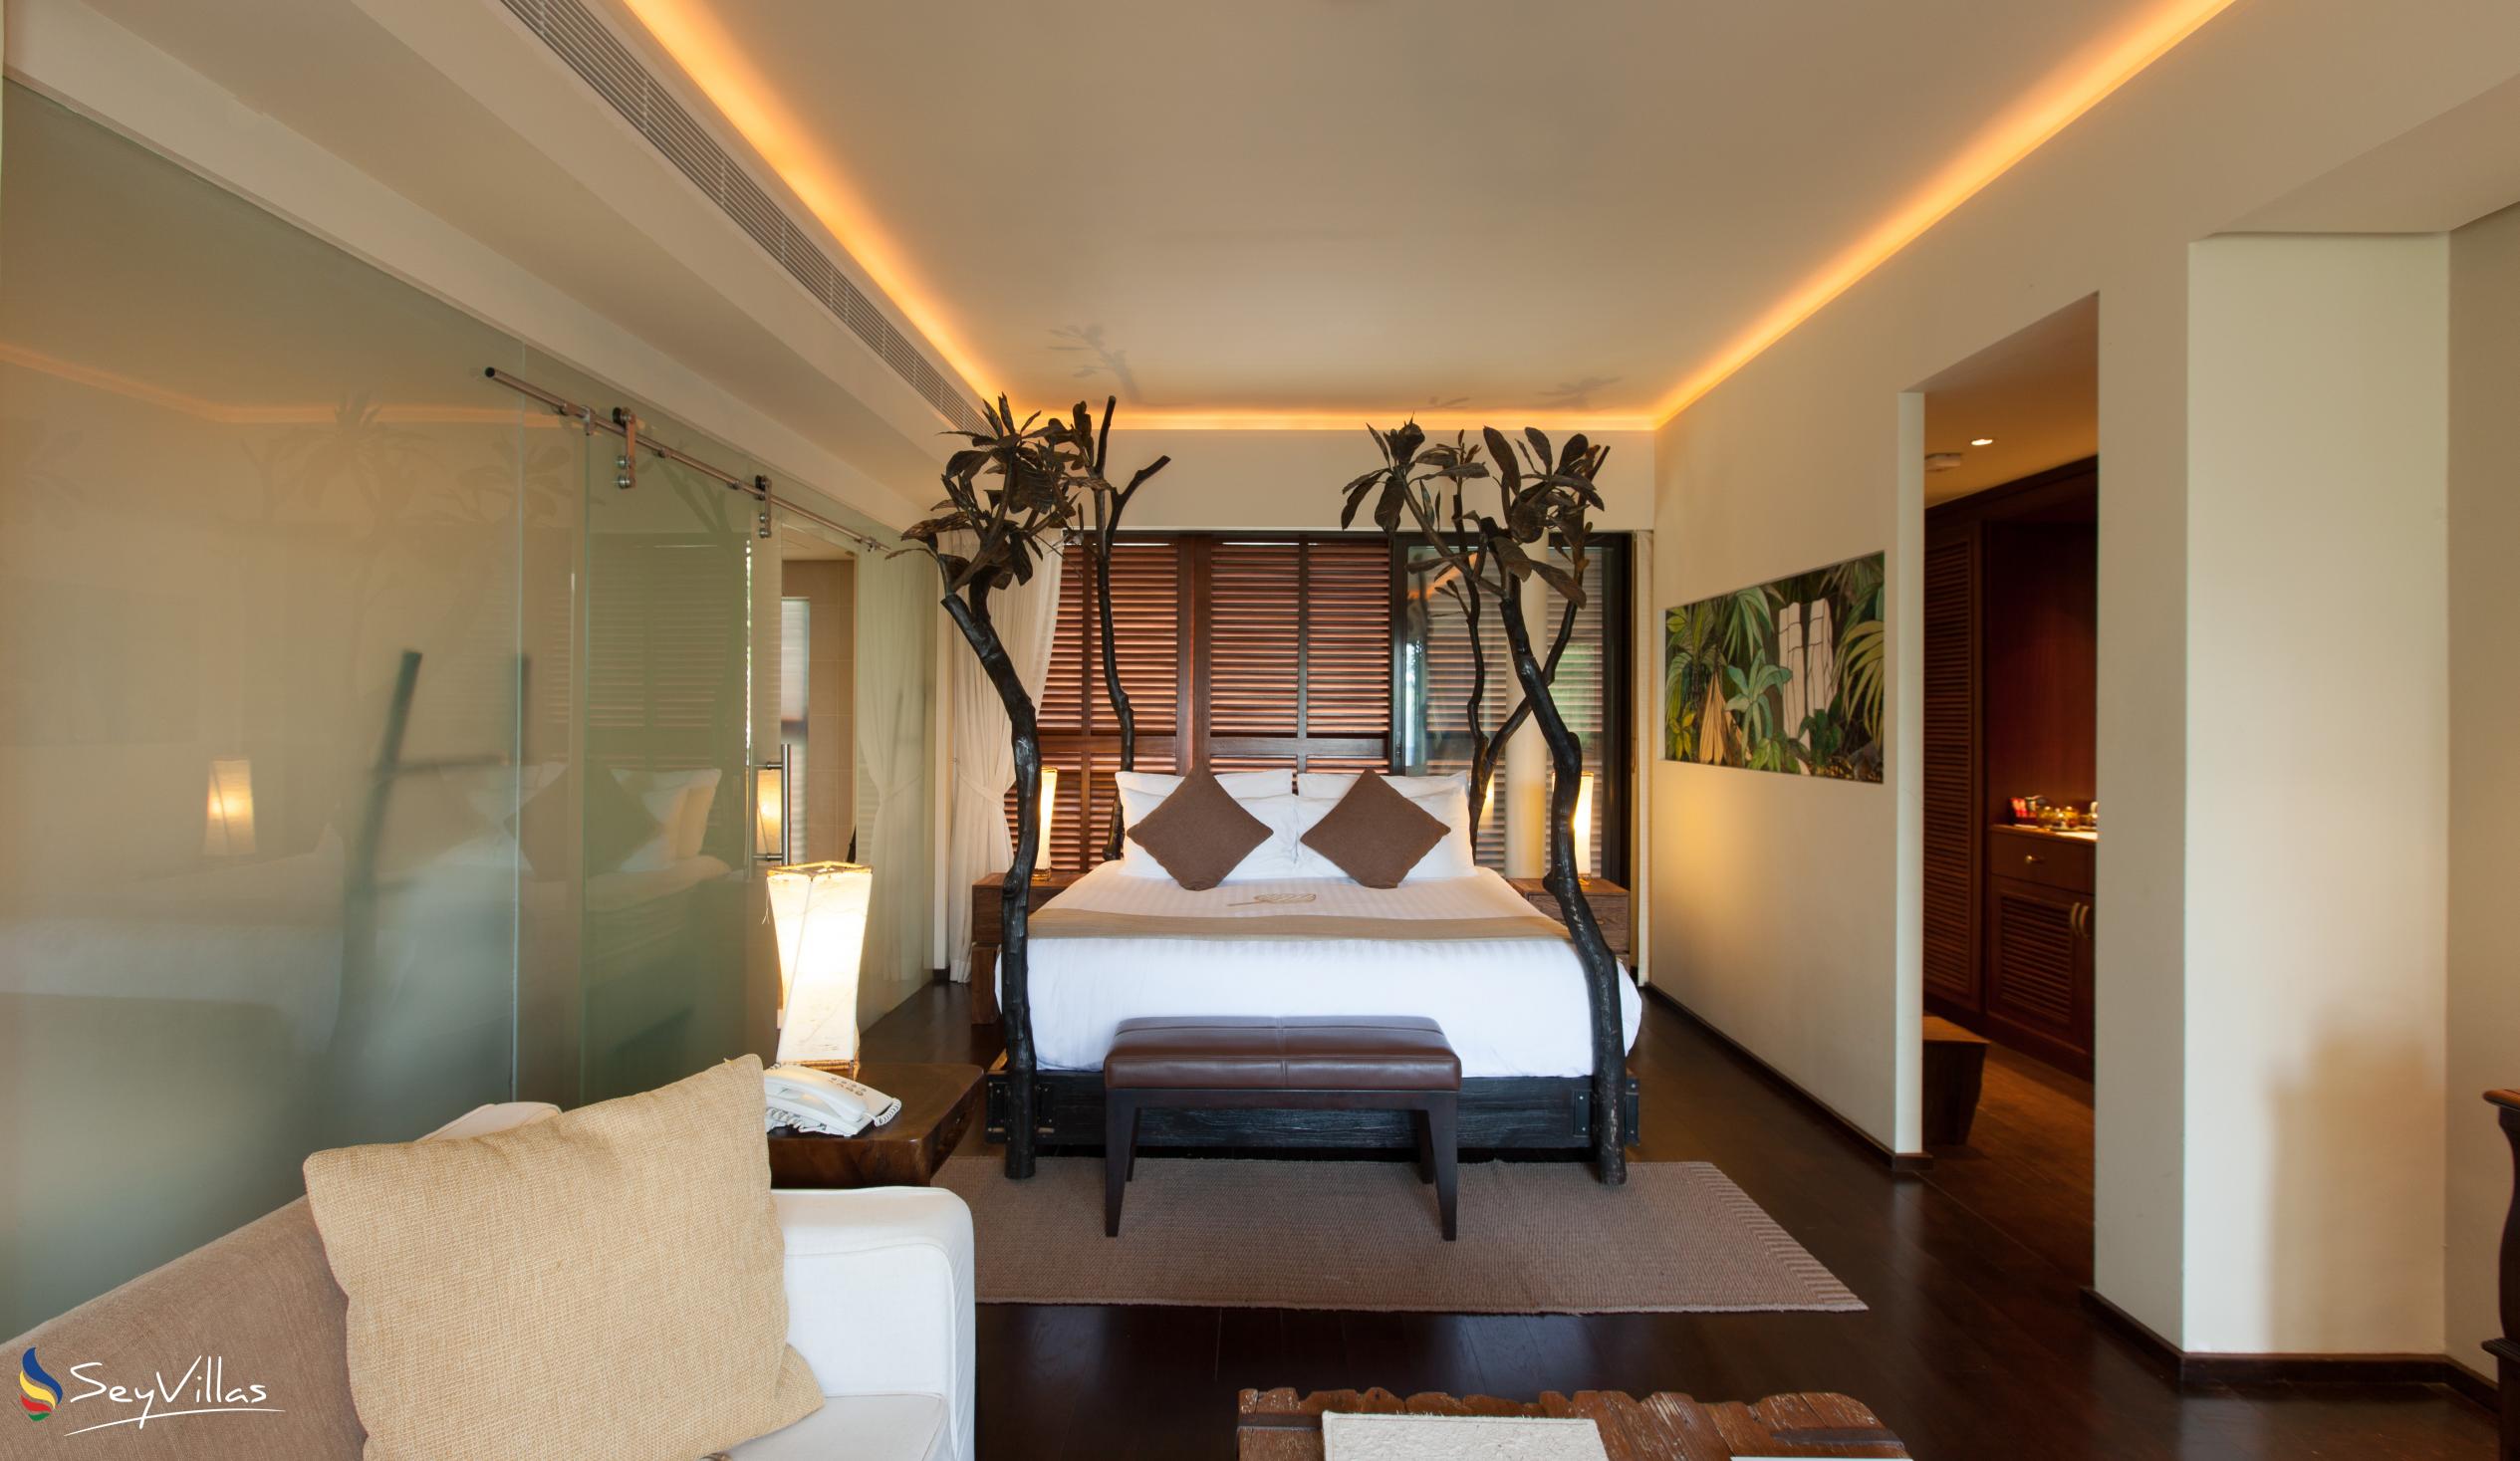 Photo 44: Dhevatara Beach Hotel - Sea View Suite with Kingsize Bed - Praslin (Seychelles)